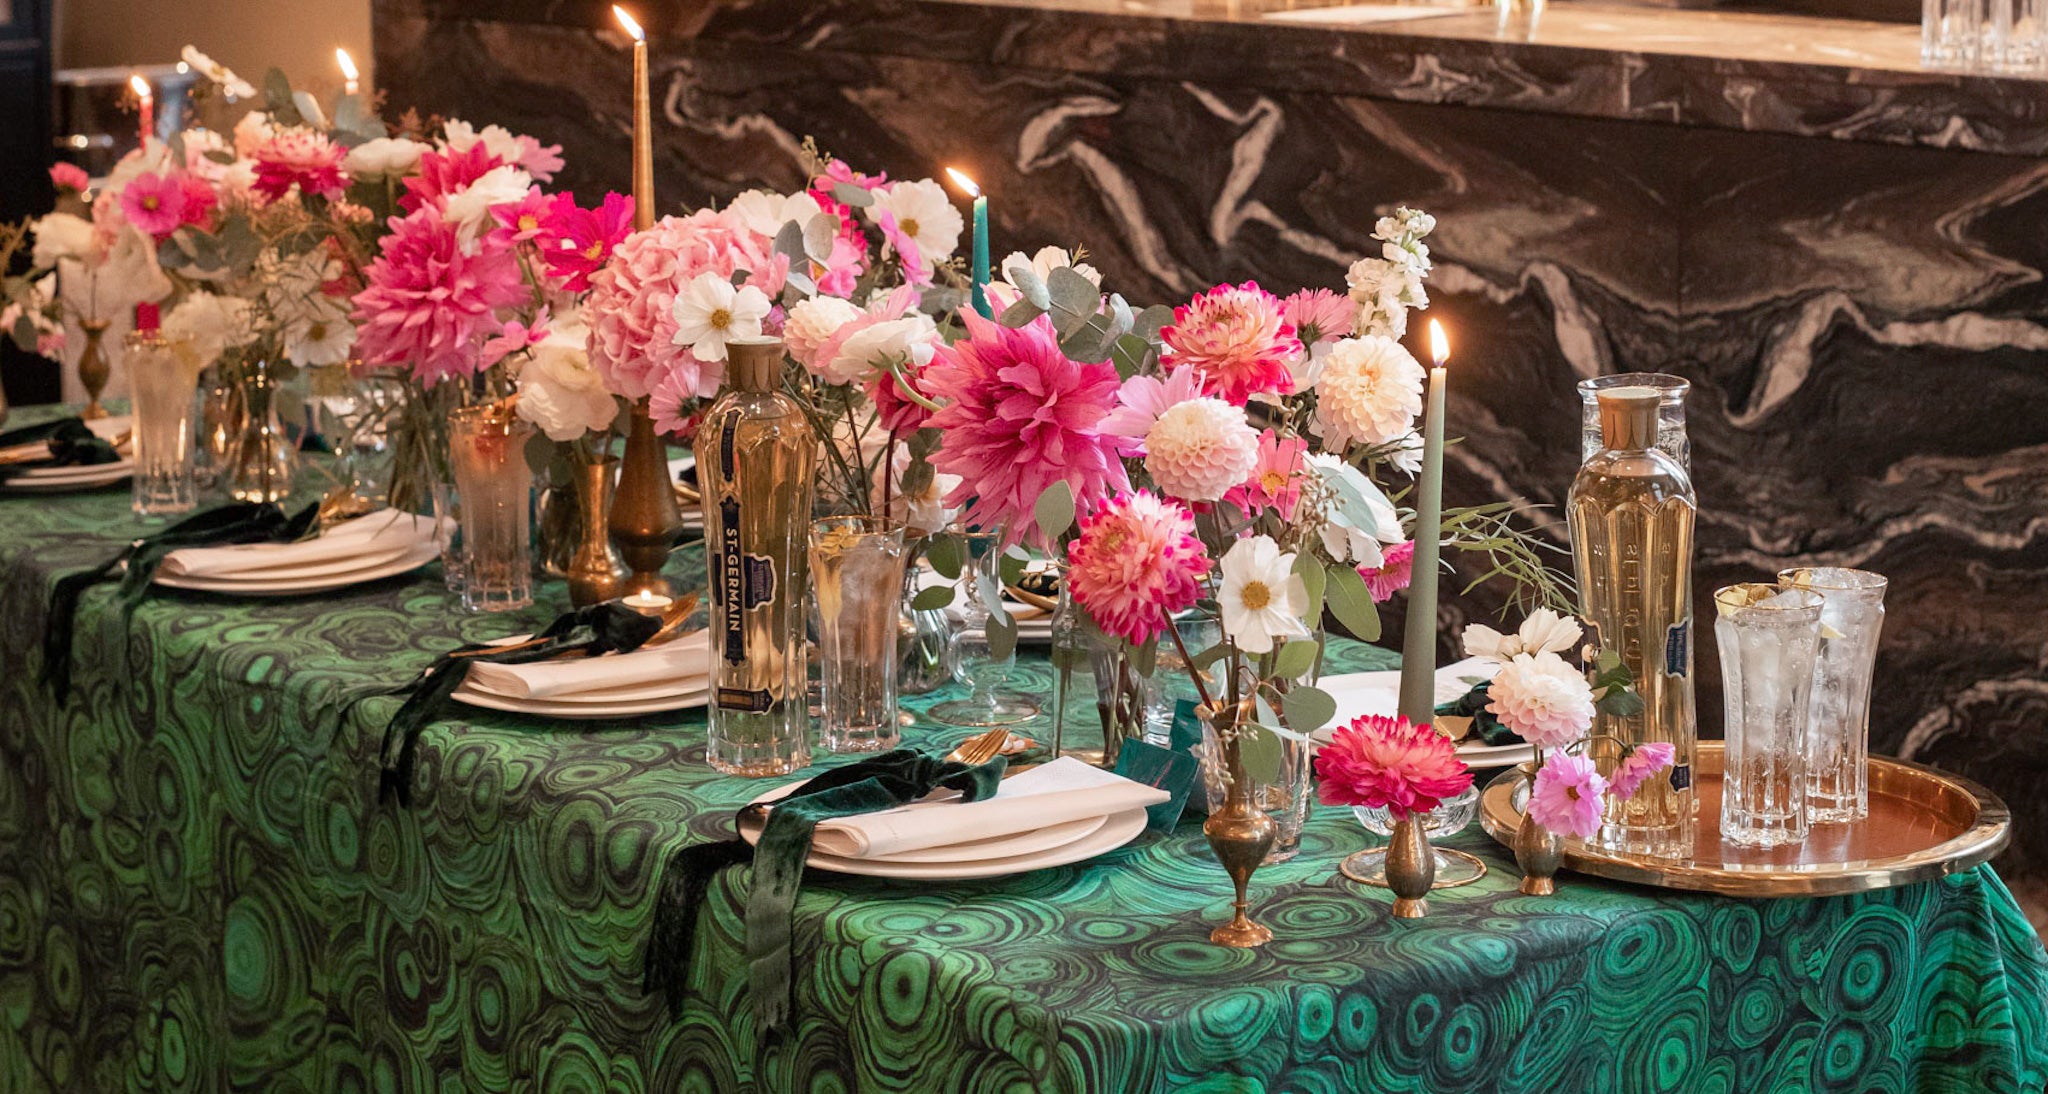 Pink and green glamorous tablescape by Rosanna Falconer